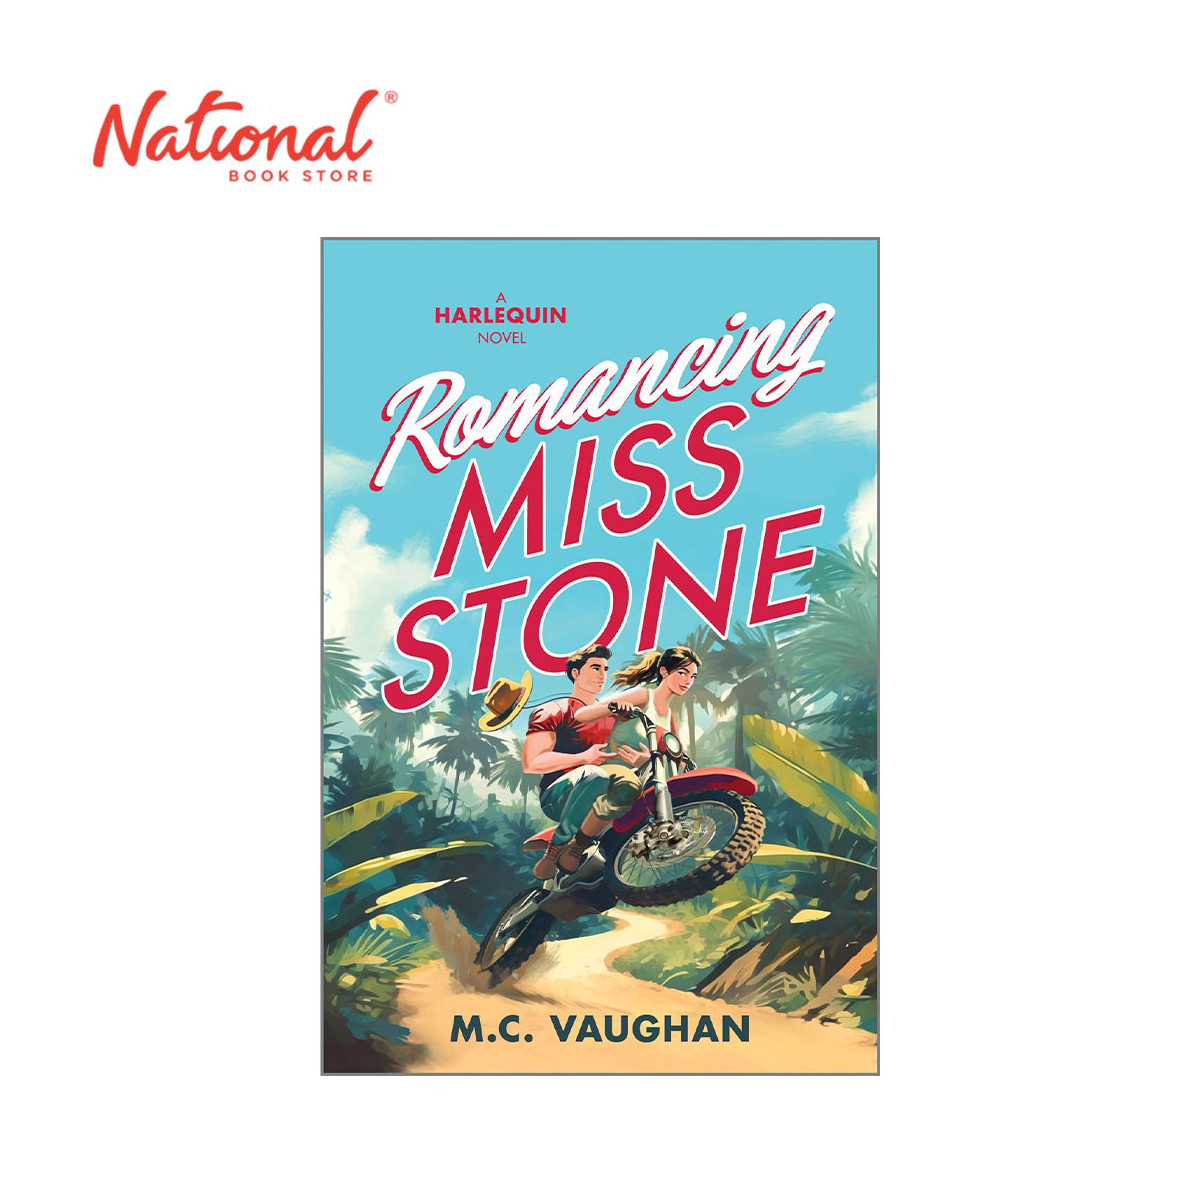 *PRE-ORDER* Romancing Miss Stone by Vaughan M.C. - Trade Paperback - Romance Fiction